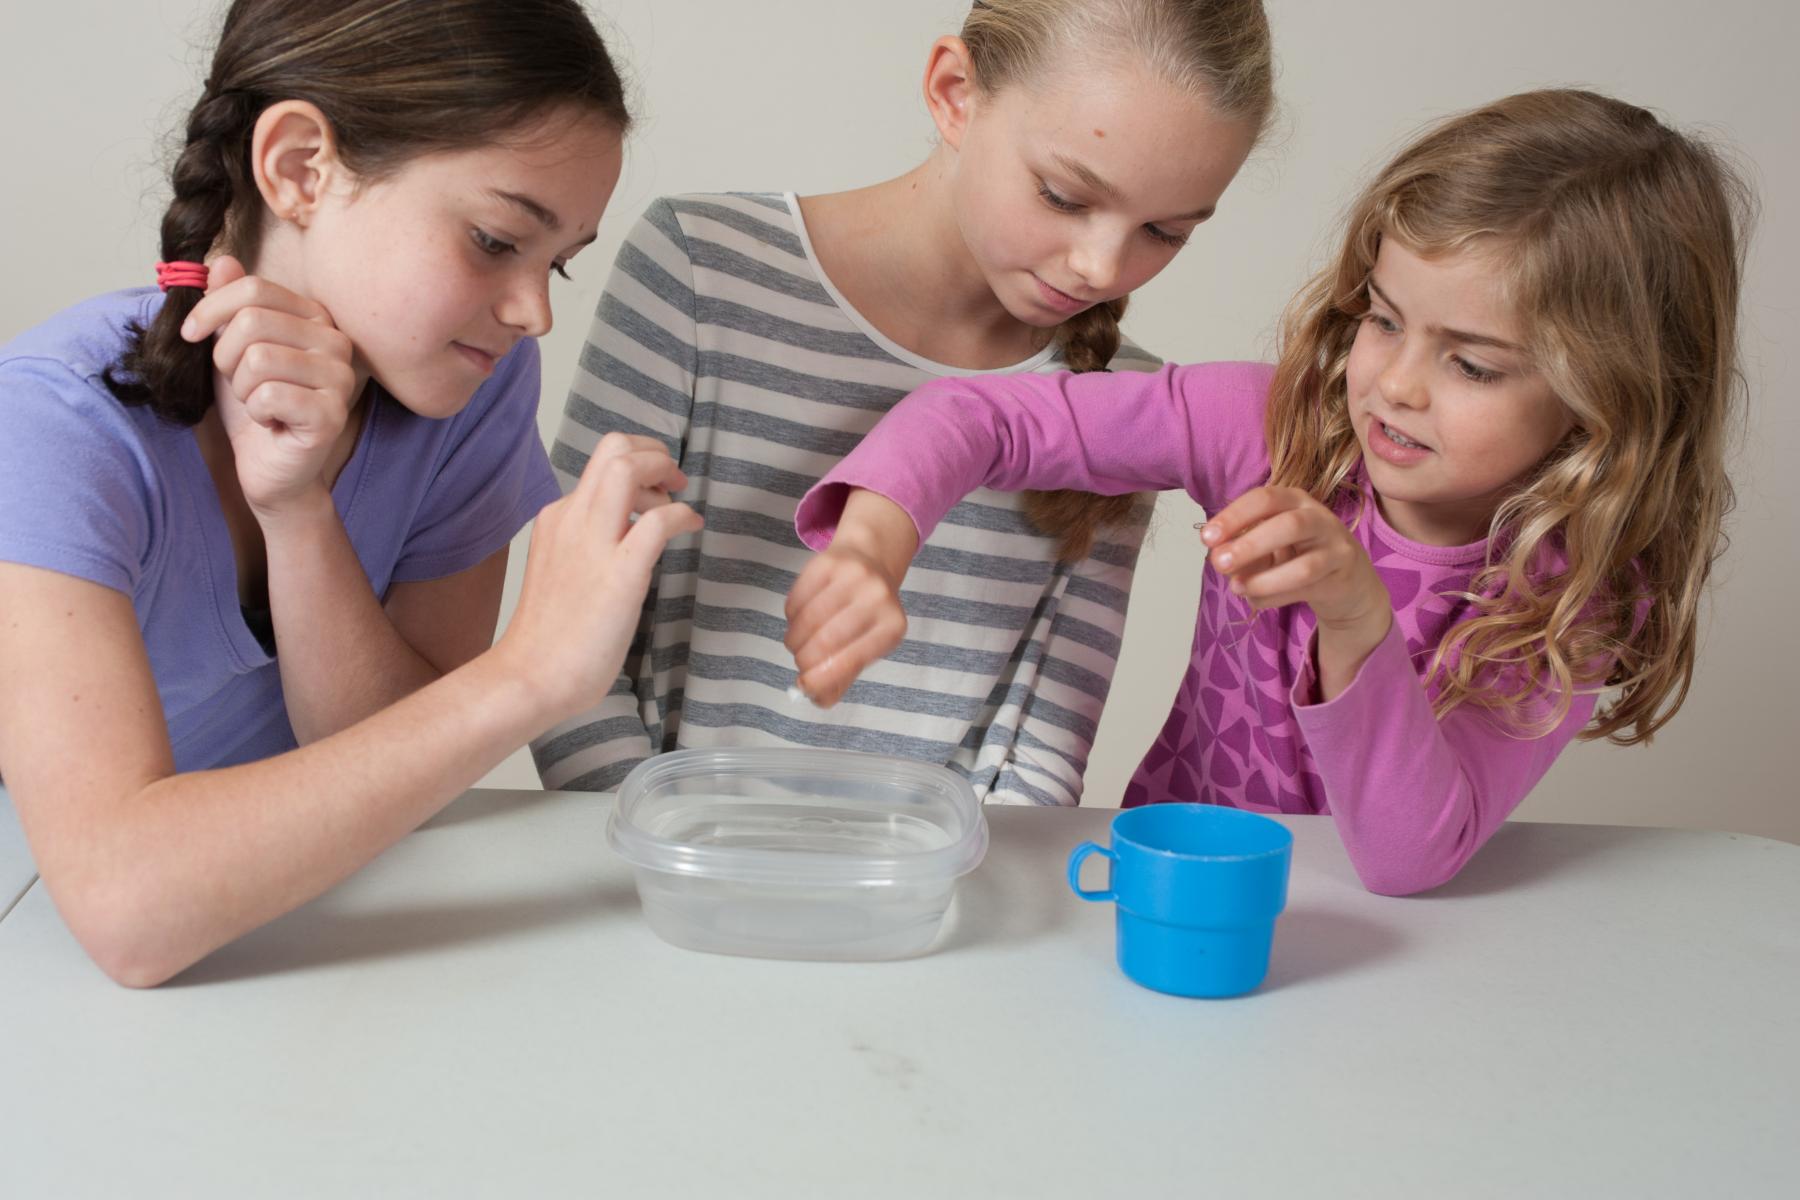 young learners placing mini teacup in water to see what happens